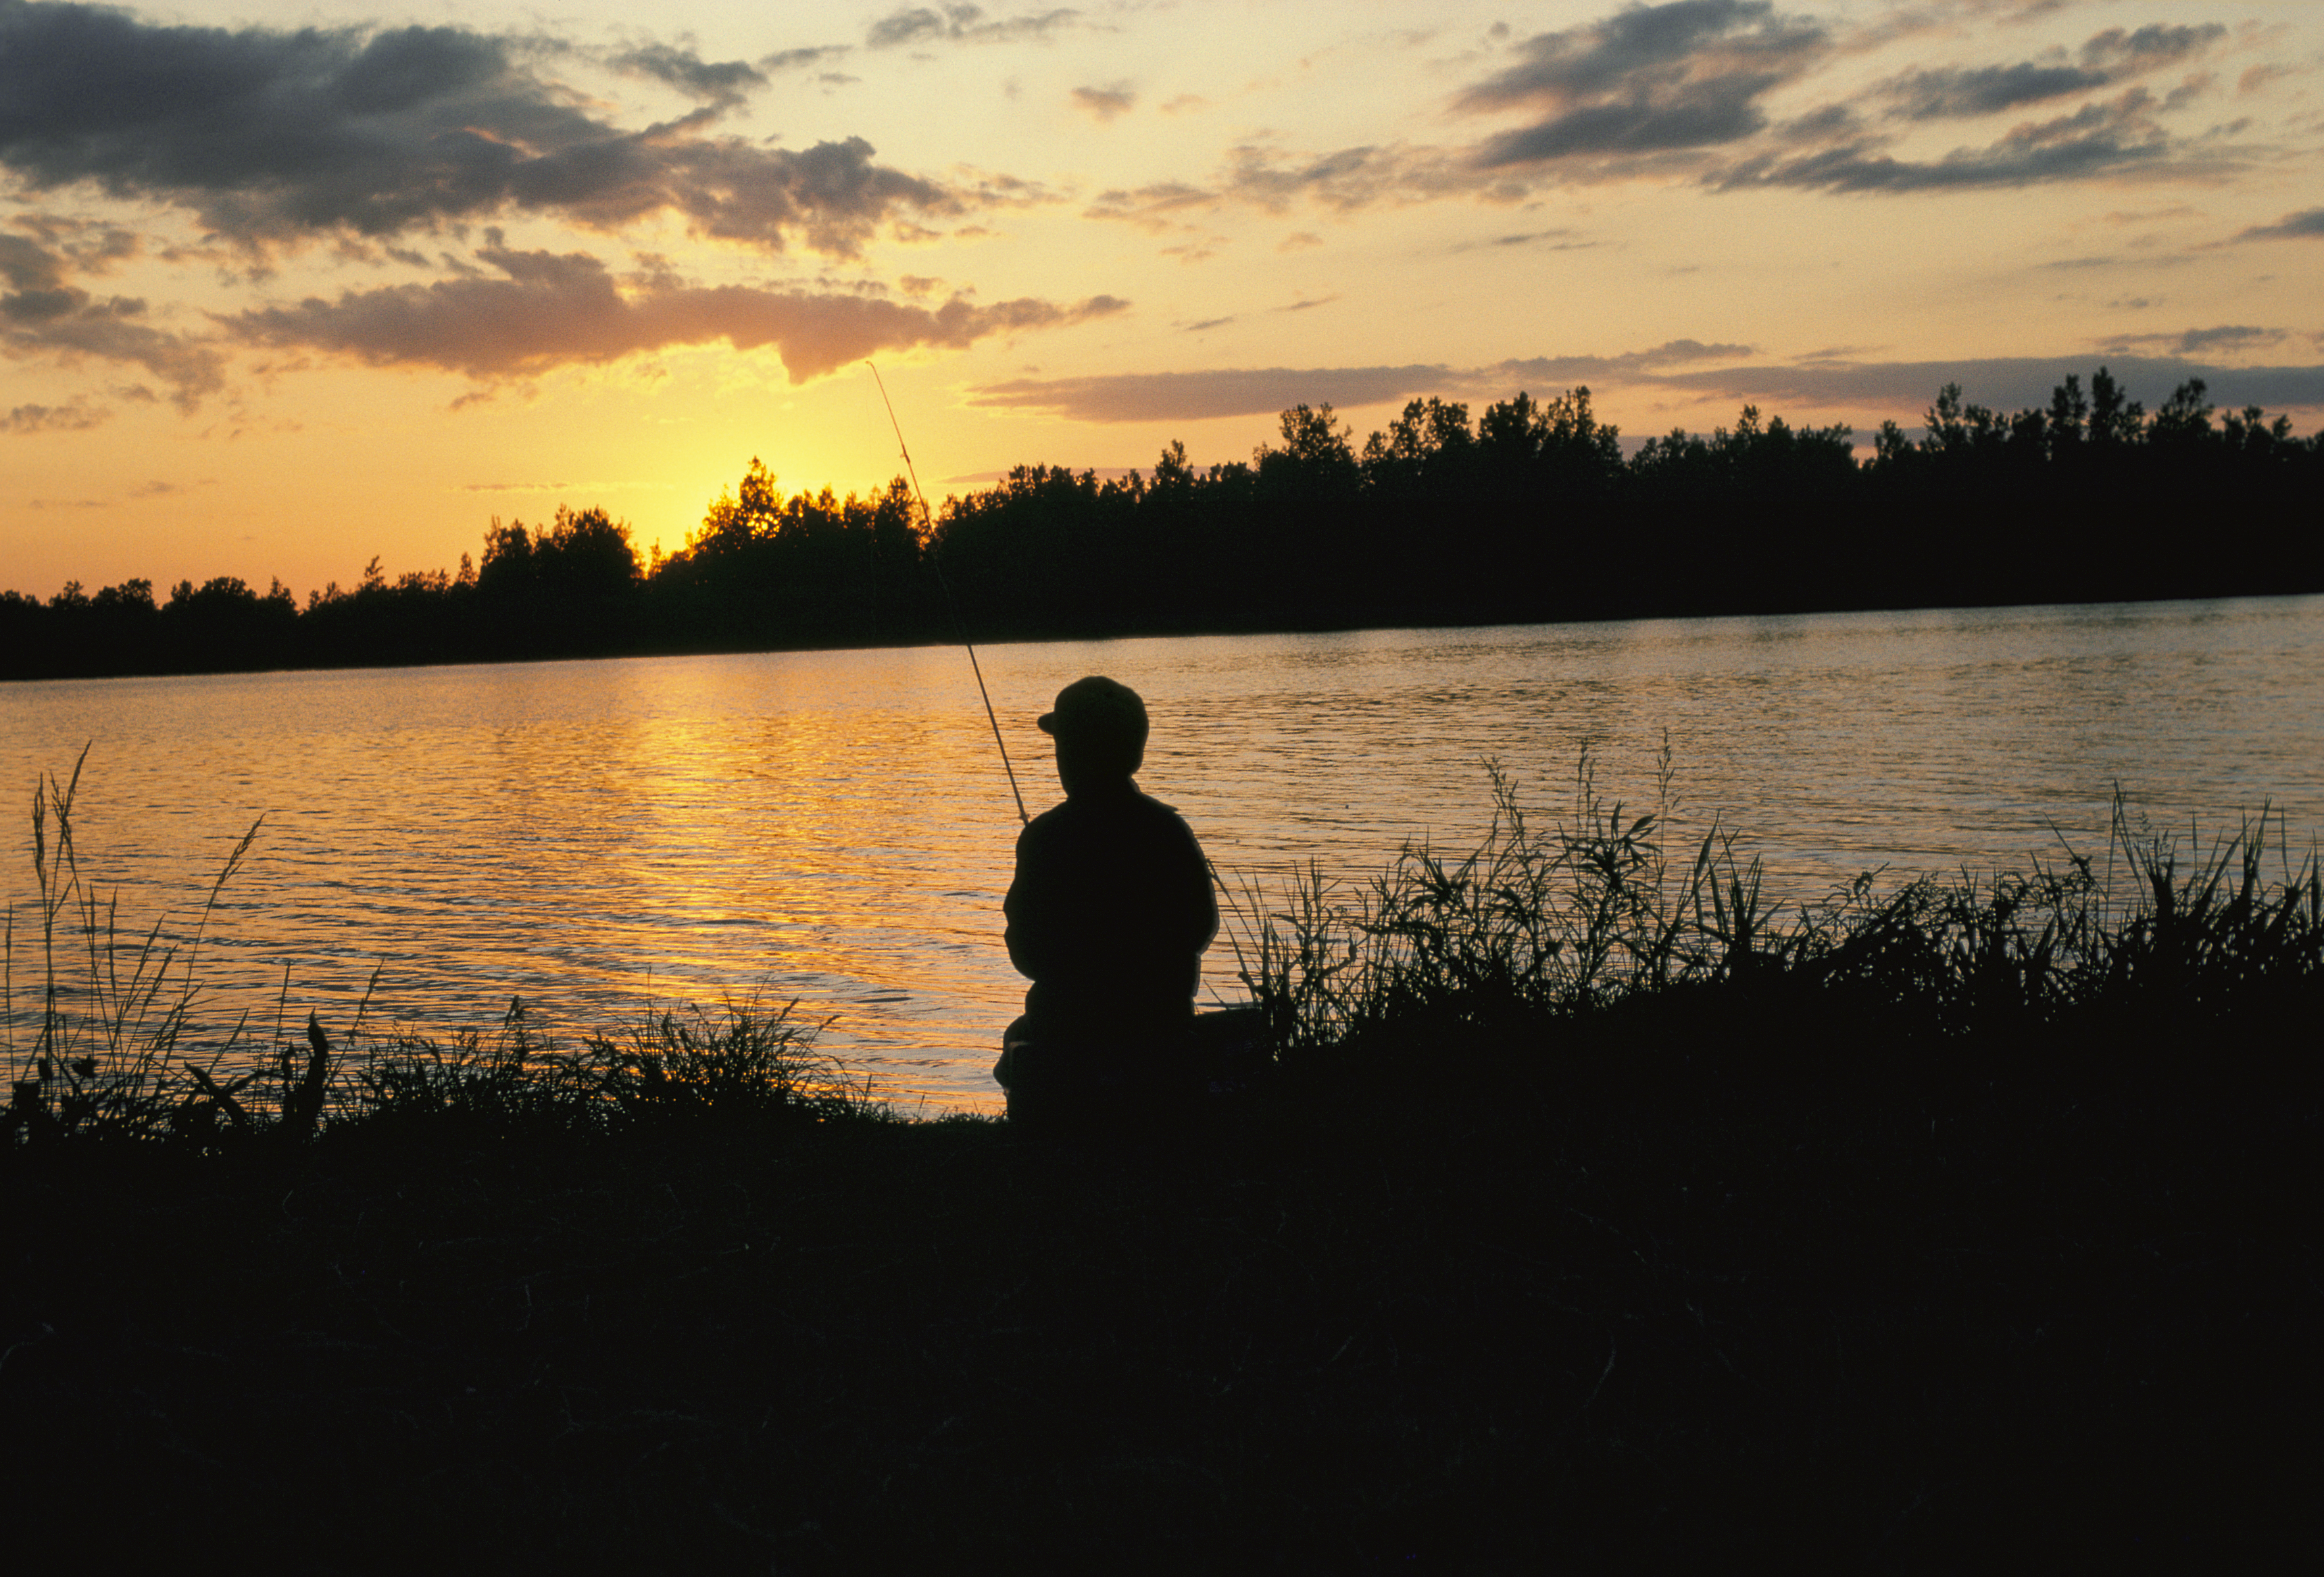 A fishing child's silhouette in front of DeSoto lake at sunset.